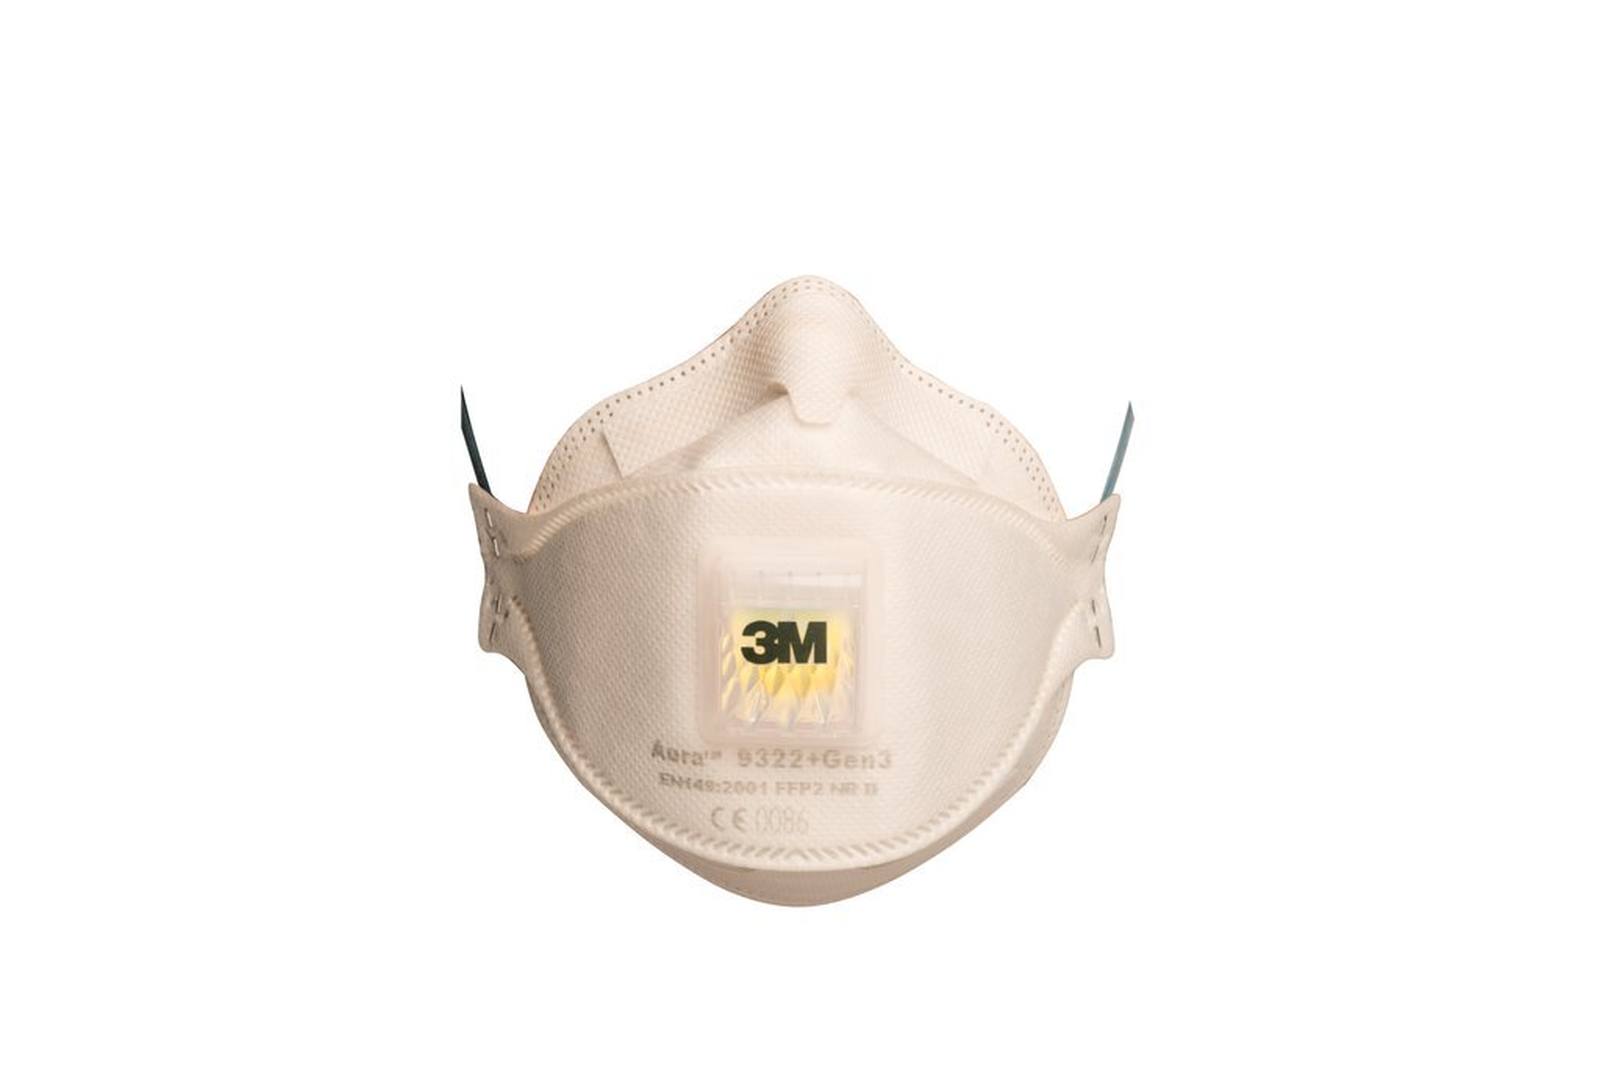 3M 9322+ Gen3 SV Aura Respirator FFP2 with cool-flow exhalation valve, up to 10 times the limit value (hygienically individually packaged), small pack